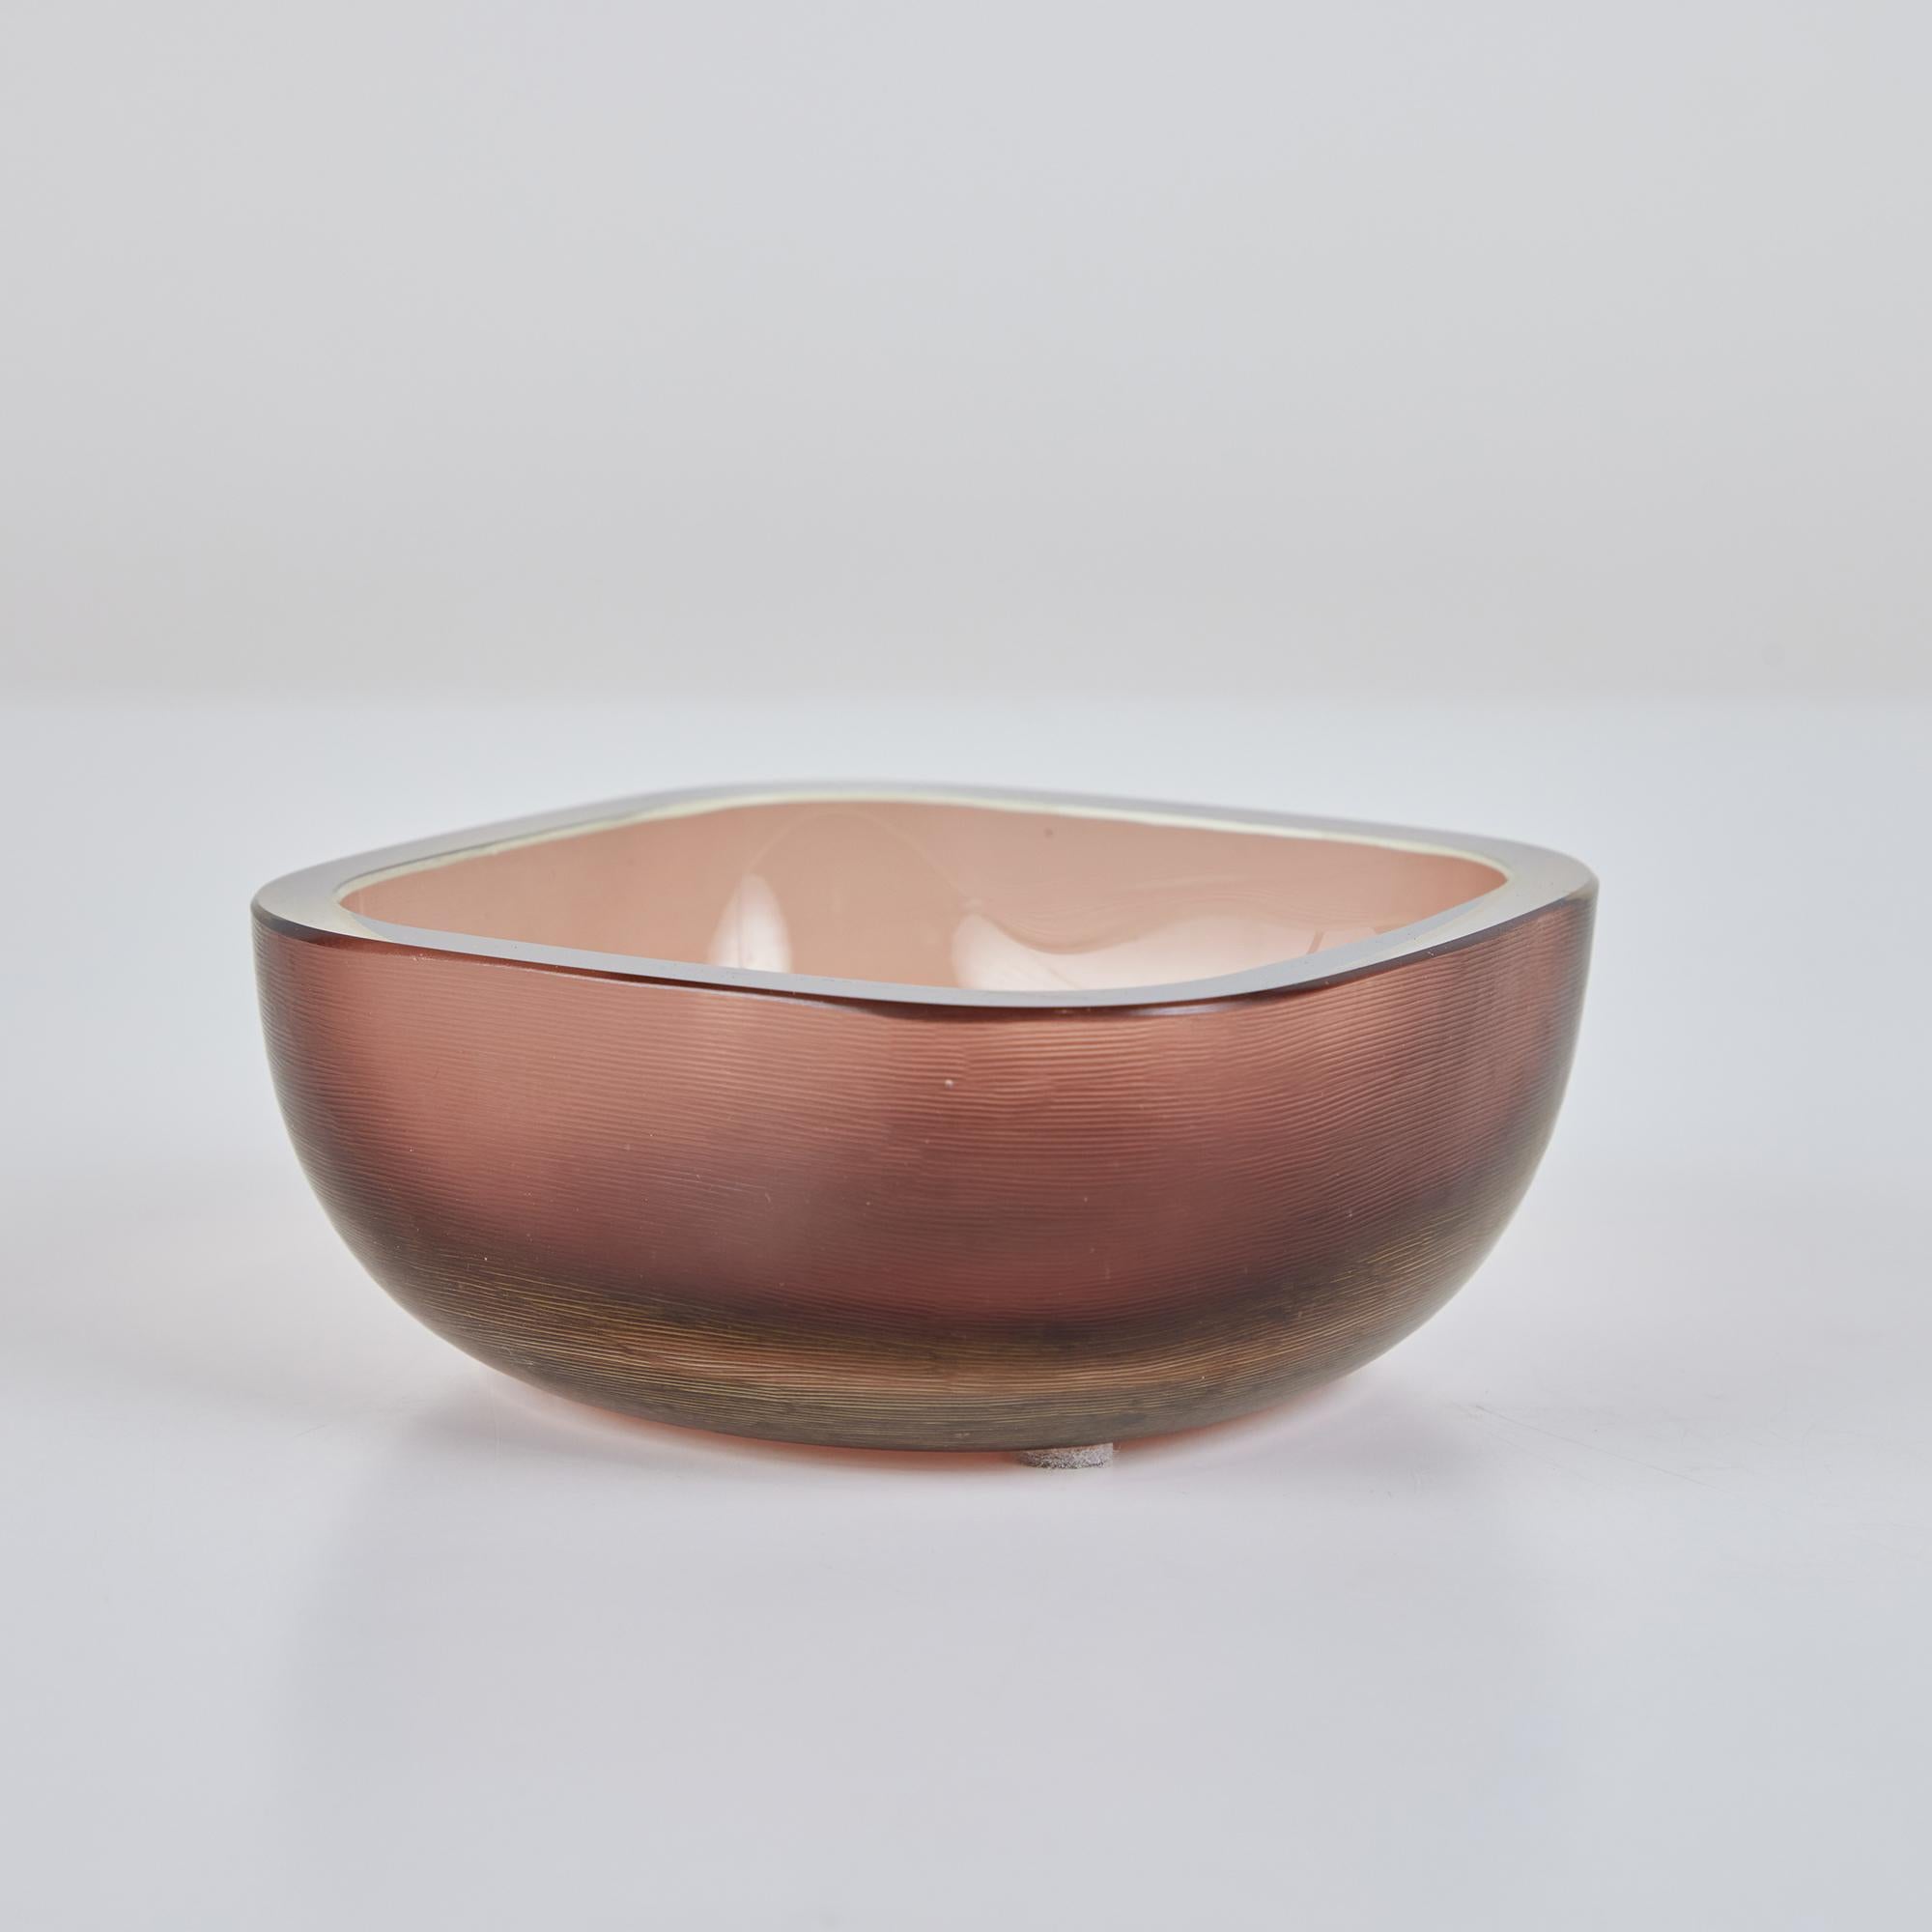 A small Murano glass dish by Venini, in a design commonly attributed to Carlo Scarpa, the company’s artistic director in the 1930s and early 40s. This modest square bowl has four sides and rounded corners. The textured glass is slightly darker at